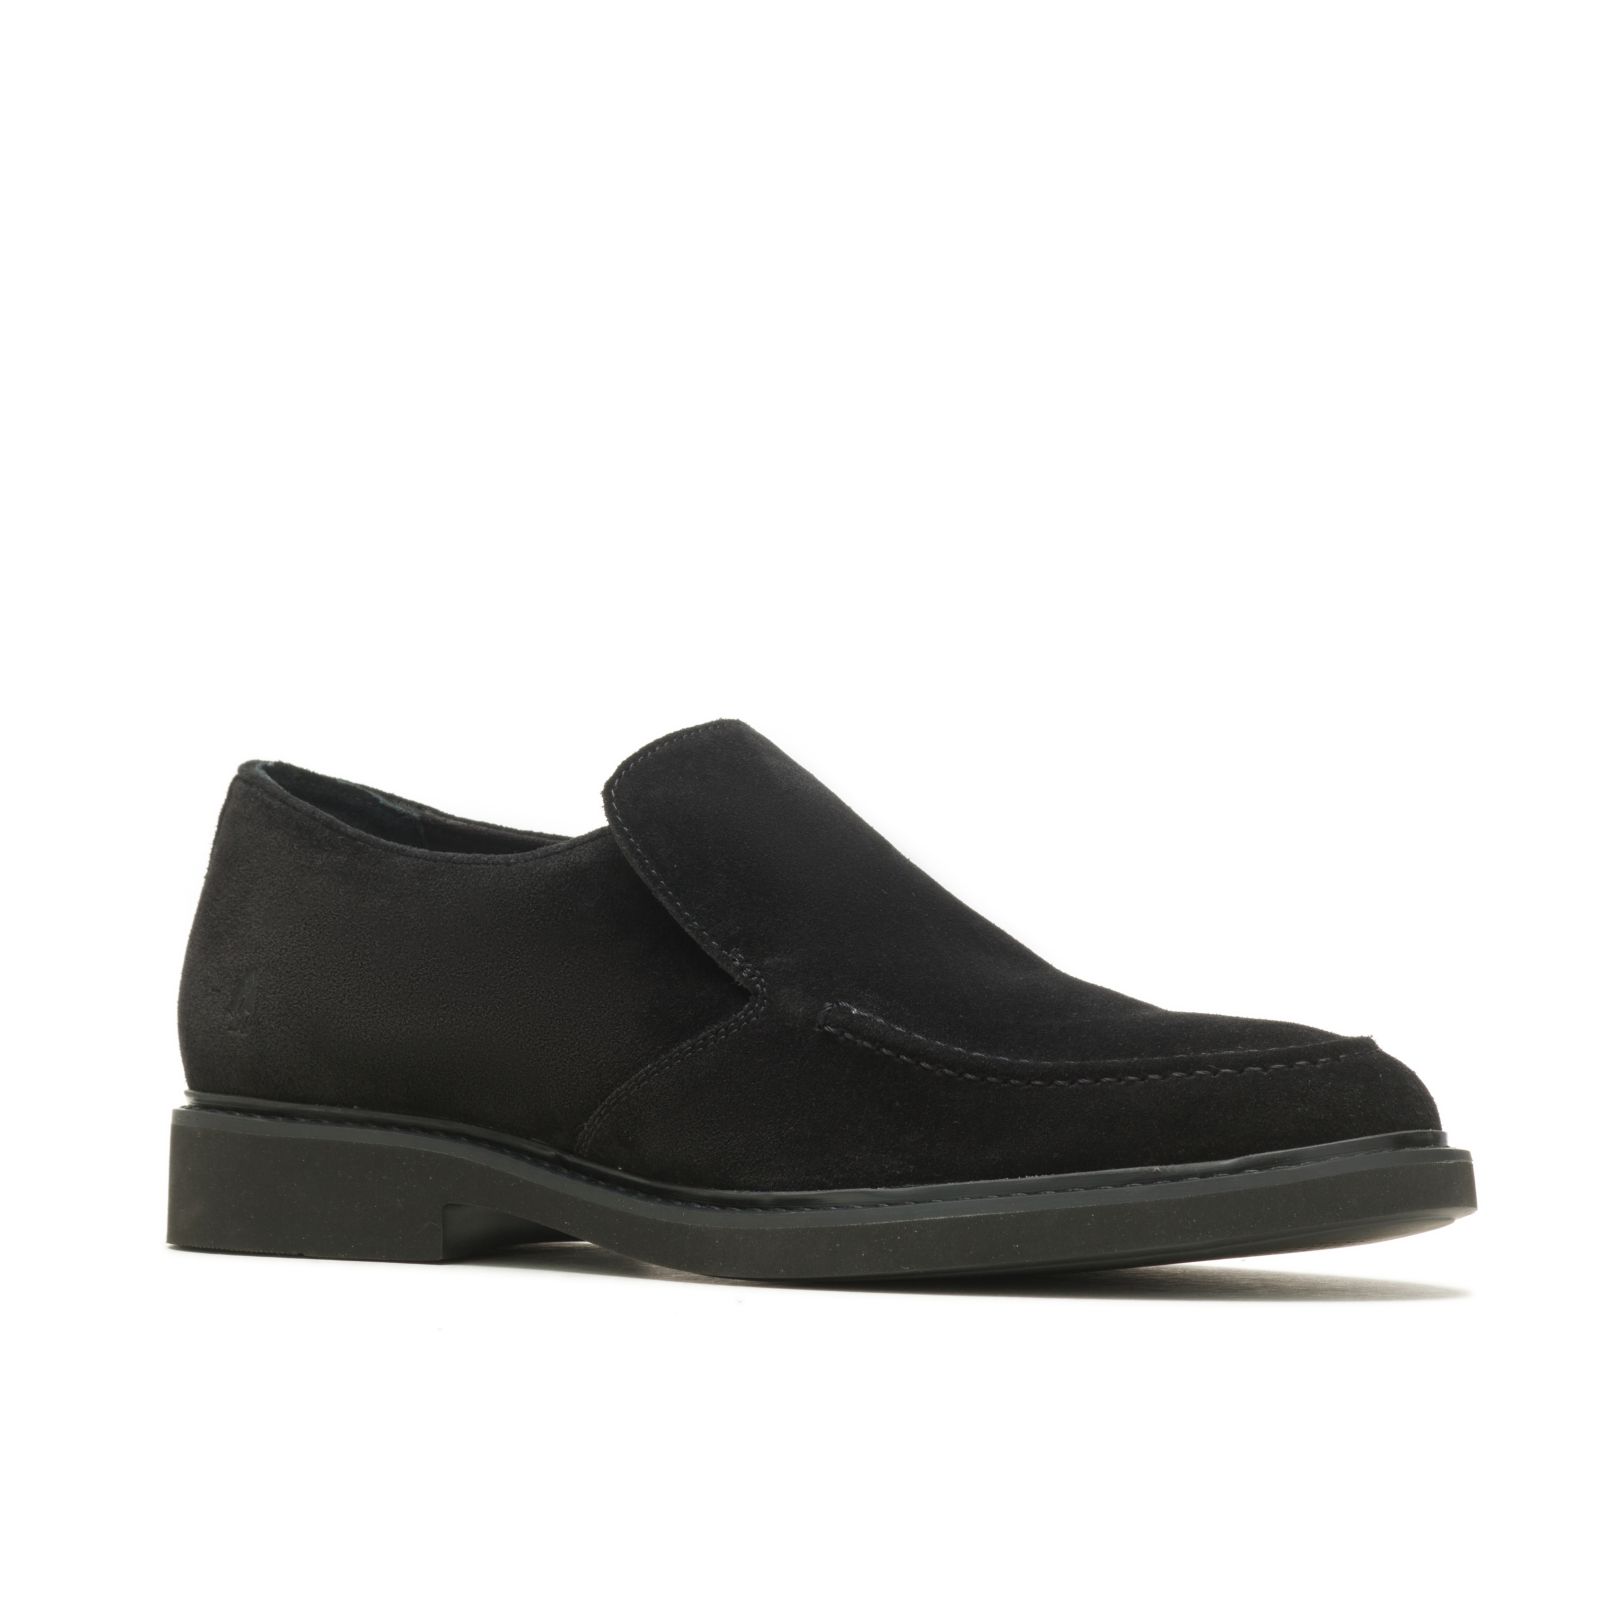 Loafers Hush Puppies Earl Hombre Negros | TCLVPFR-30